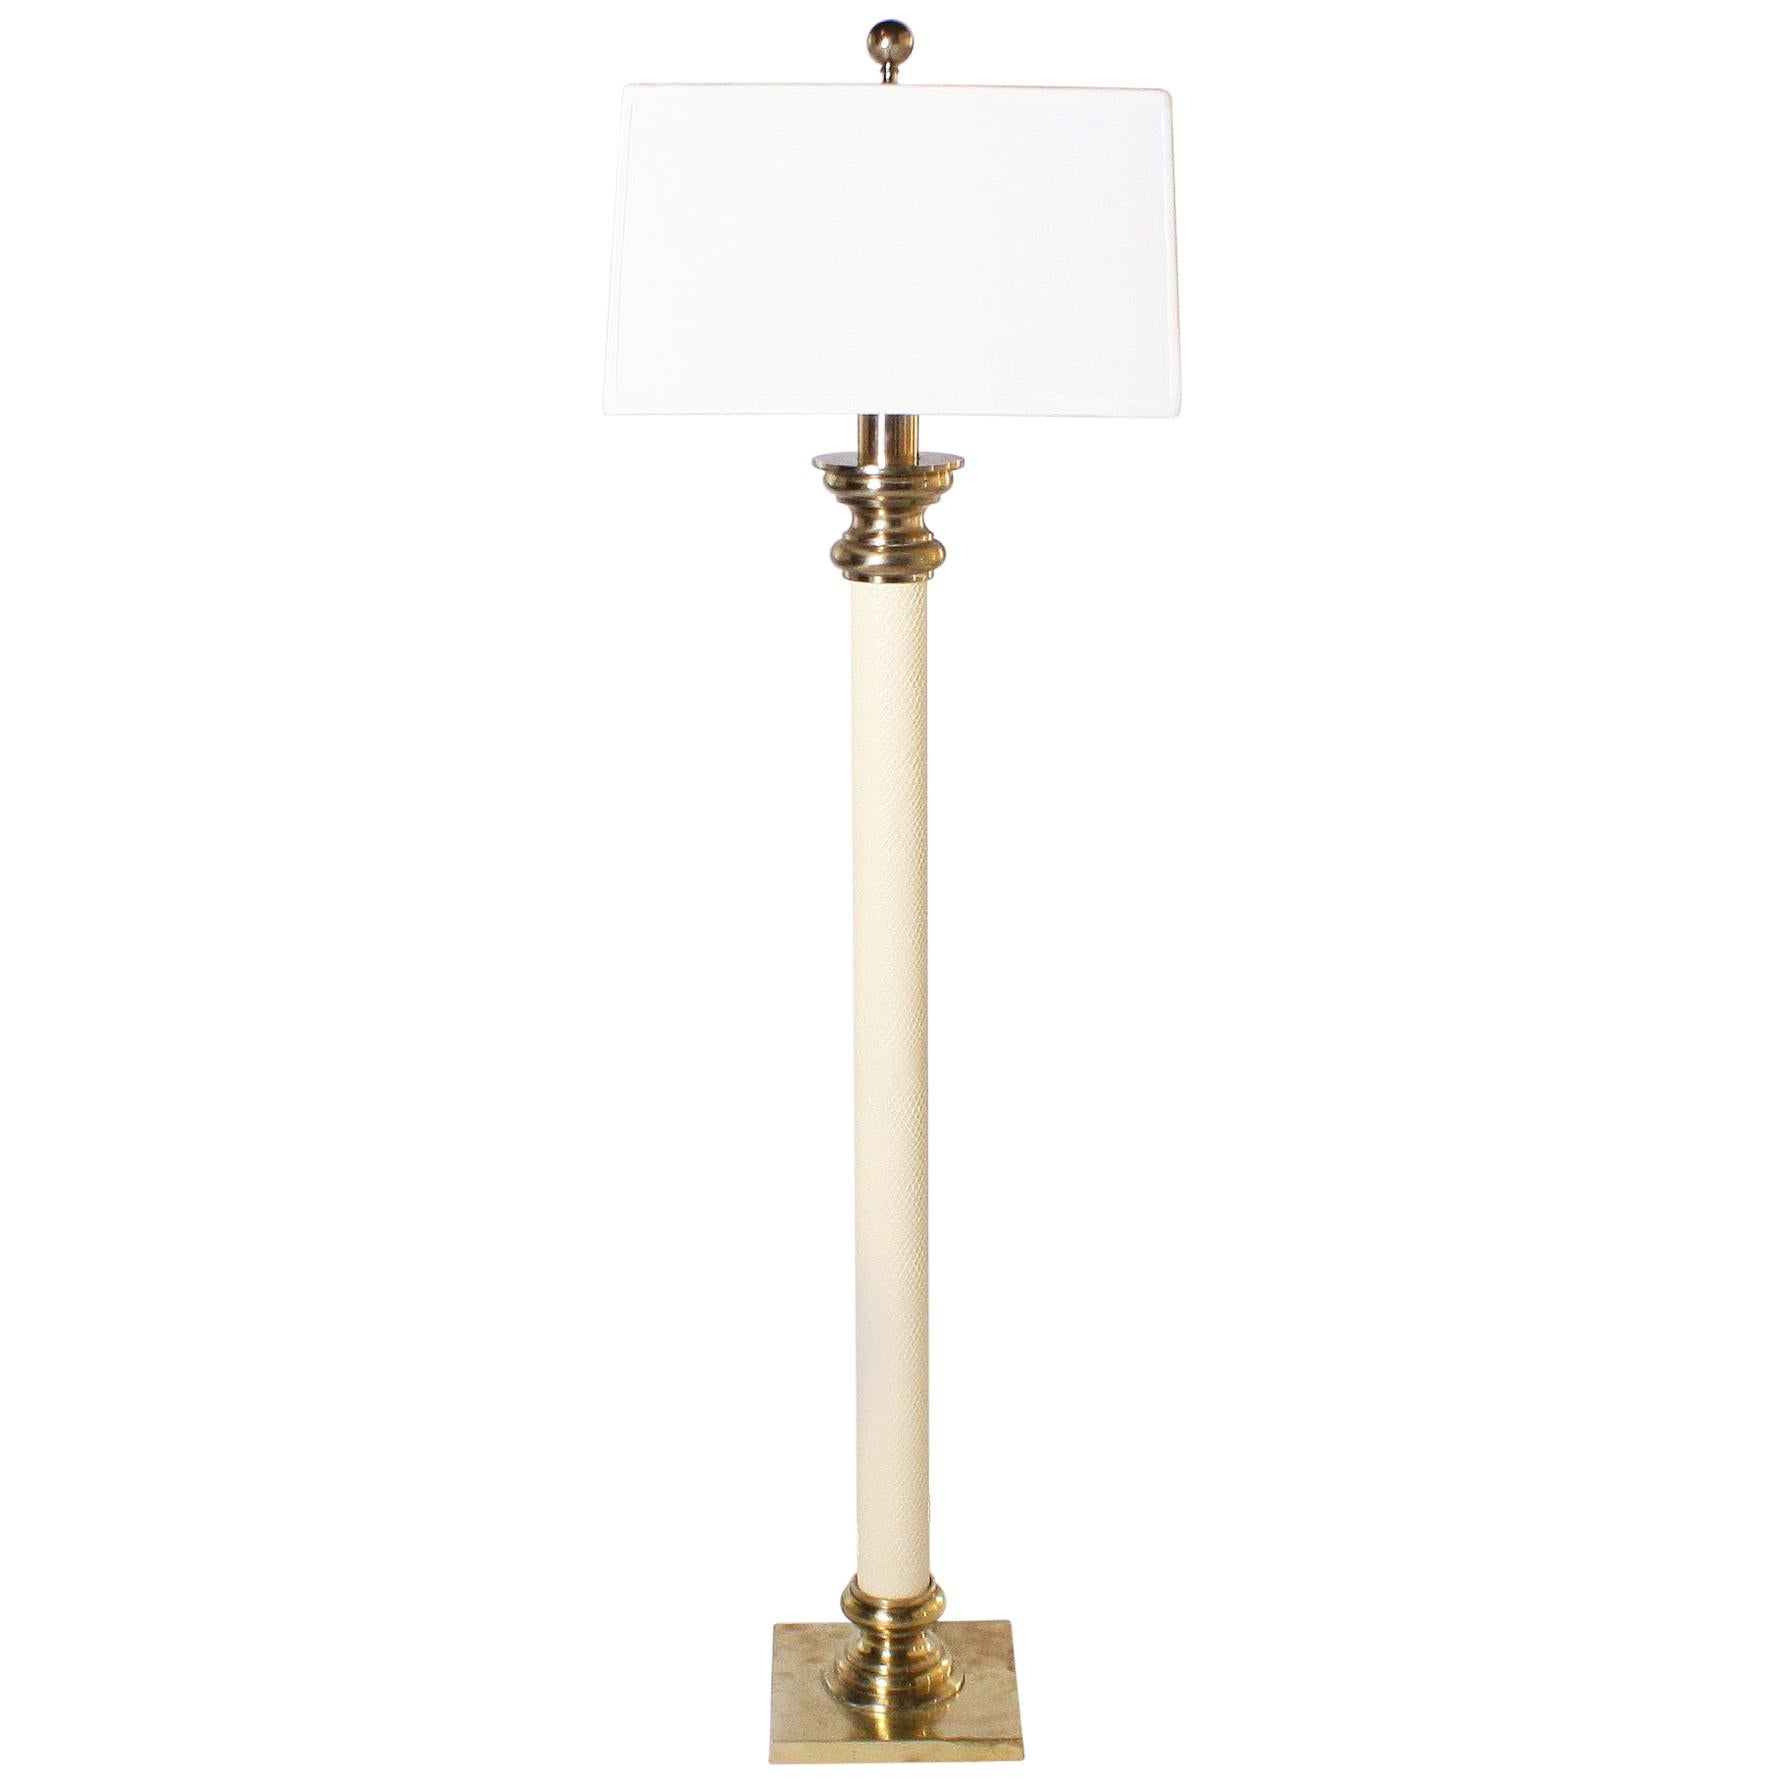 Ivory Faux Leather Floor Lamp with Brass Details, circa 1970